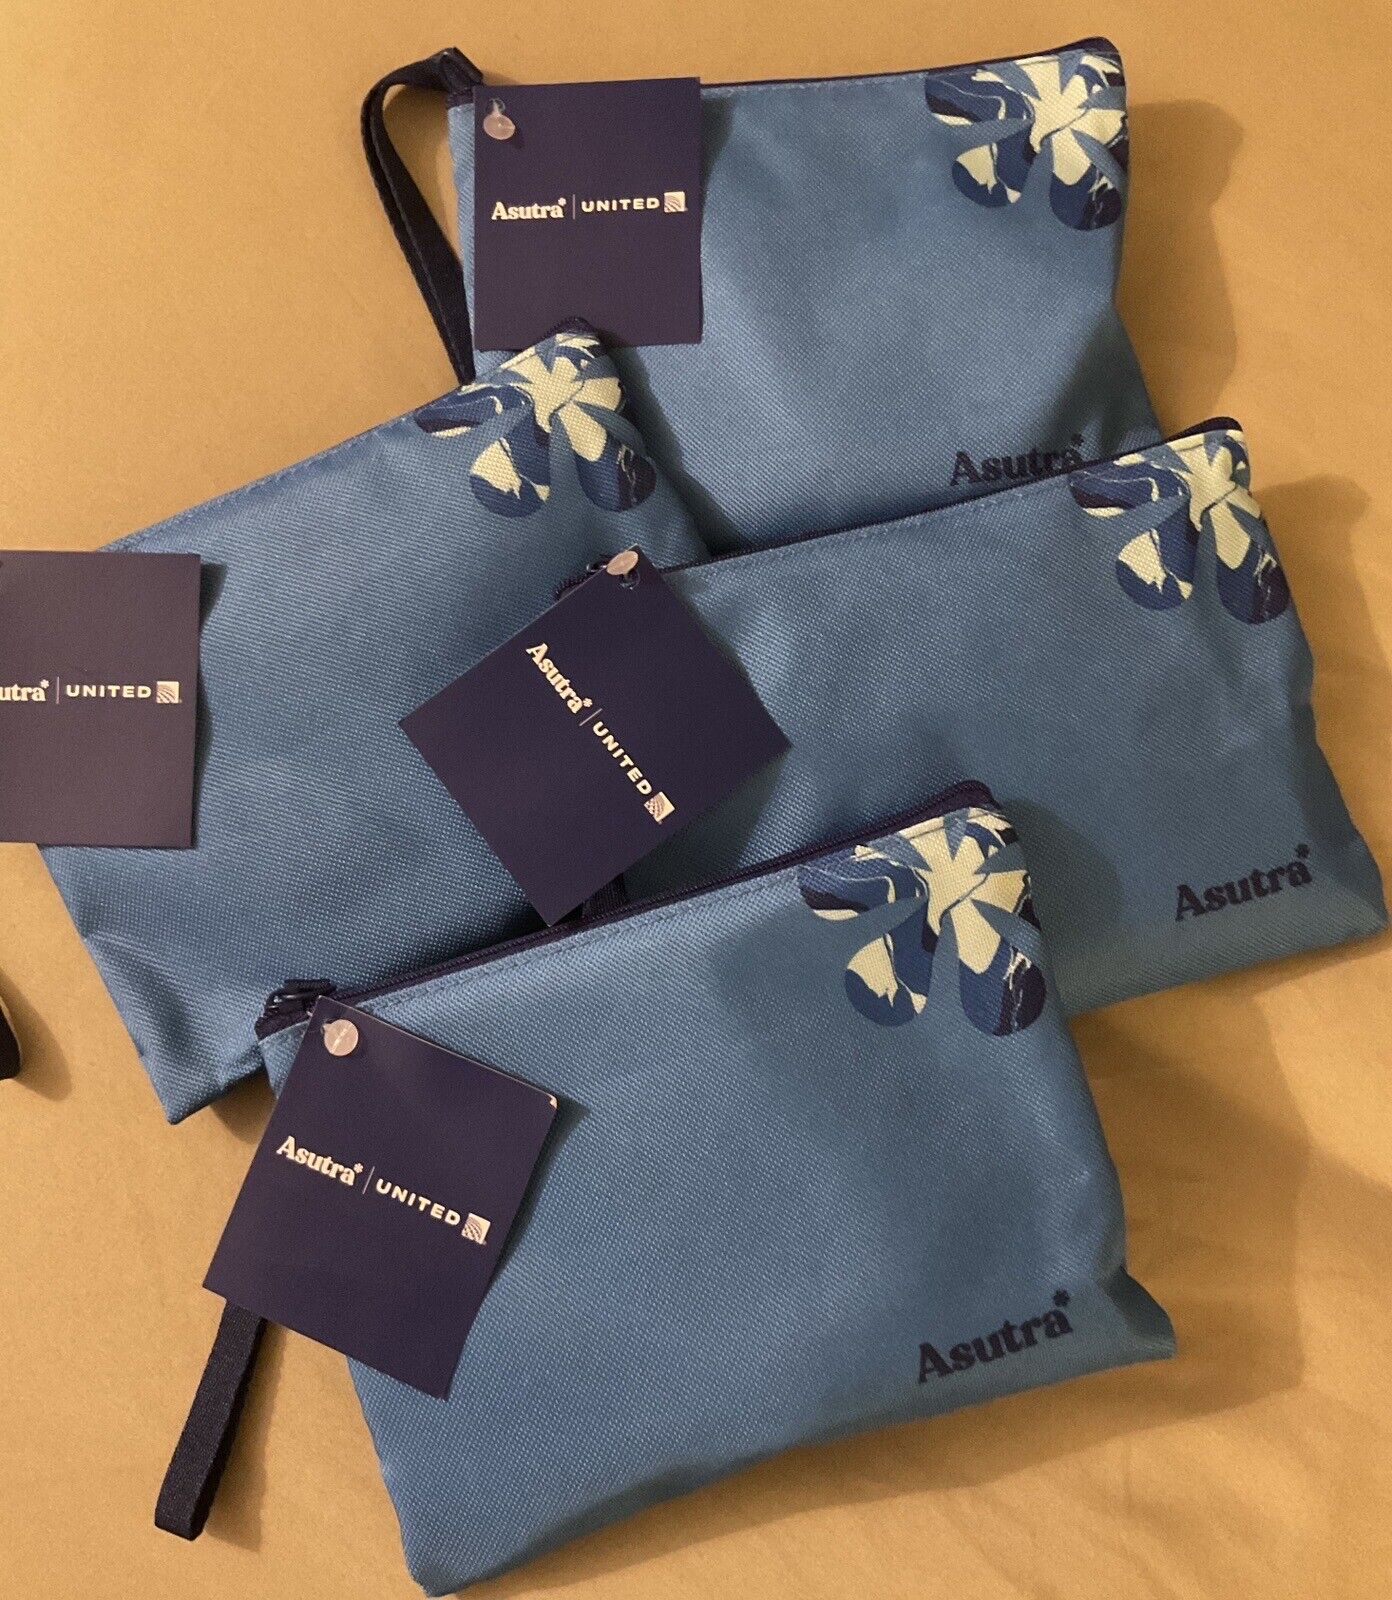 NEW Set of 4 United Airlines Polaris Transcontinental Amenity Kit ASUTRA NWT